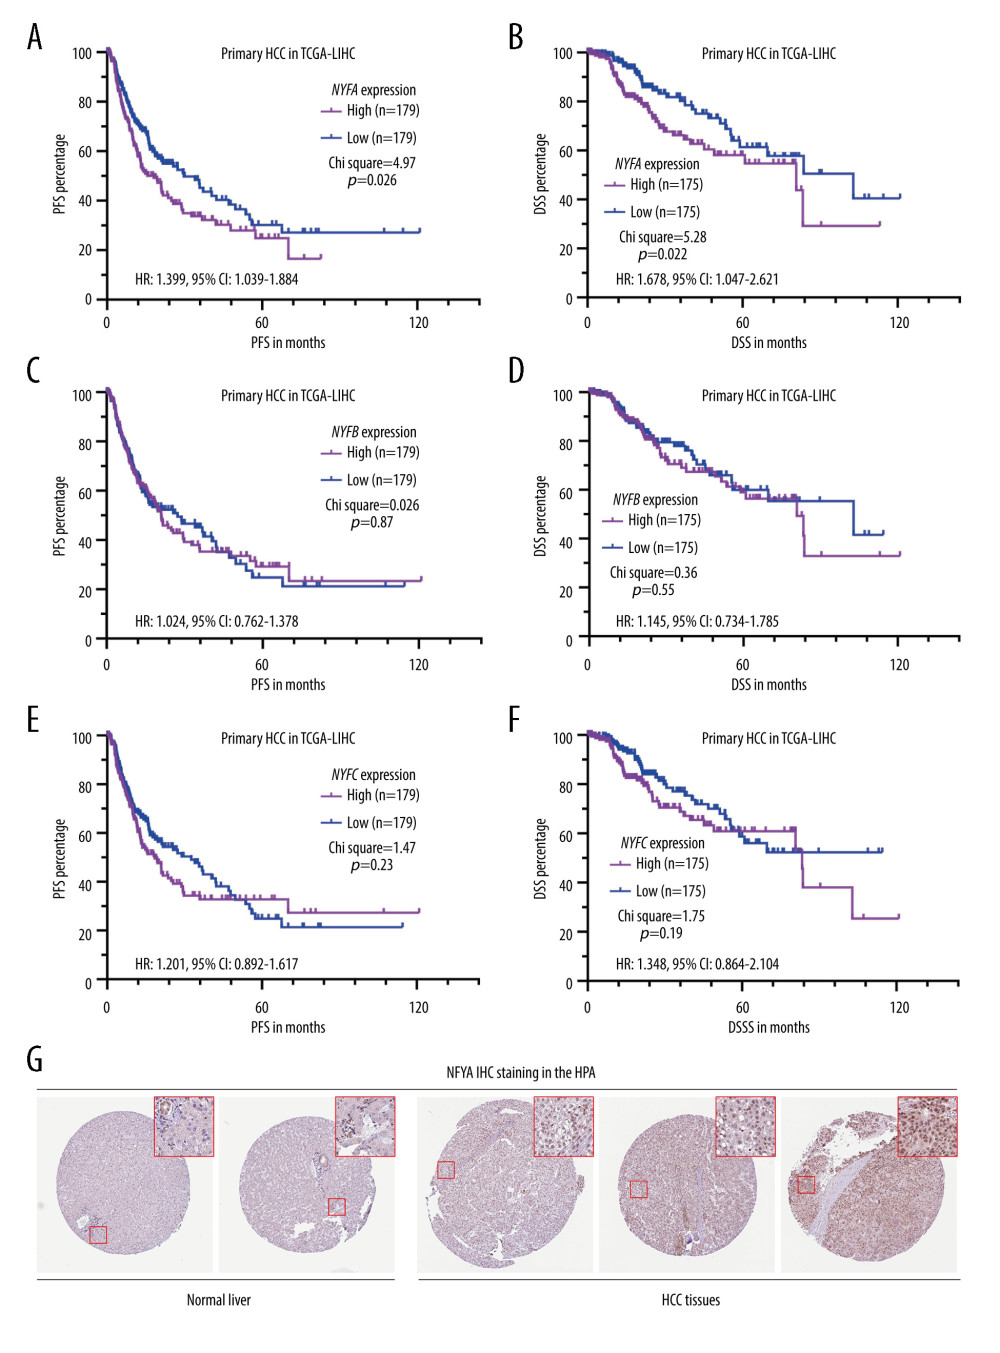 HCC patients with elevated NFYA expression had significantly worse survival(A–F) K-M analysis for DSS (B, D, F) and PFS (A, C, E) comparison was performed. Patients with primary HCC in TCGA were classified into 2 groups by the median NFYA (A, B), NFYB (C, D) or NFYC (E, F) expression. (G) NFYA protein expression in normal liver and HCC tissues. IHC staining images were obtained from the HPA, from the following links: https://www.proteinatlas.org/ENSG00000001167-NFYA/tissue/liver and https://www.proteinatlas.org/ENSG00000001167-NFYA/pathology/liver+cancer#ihc.